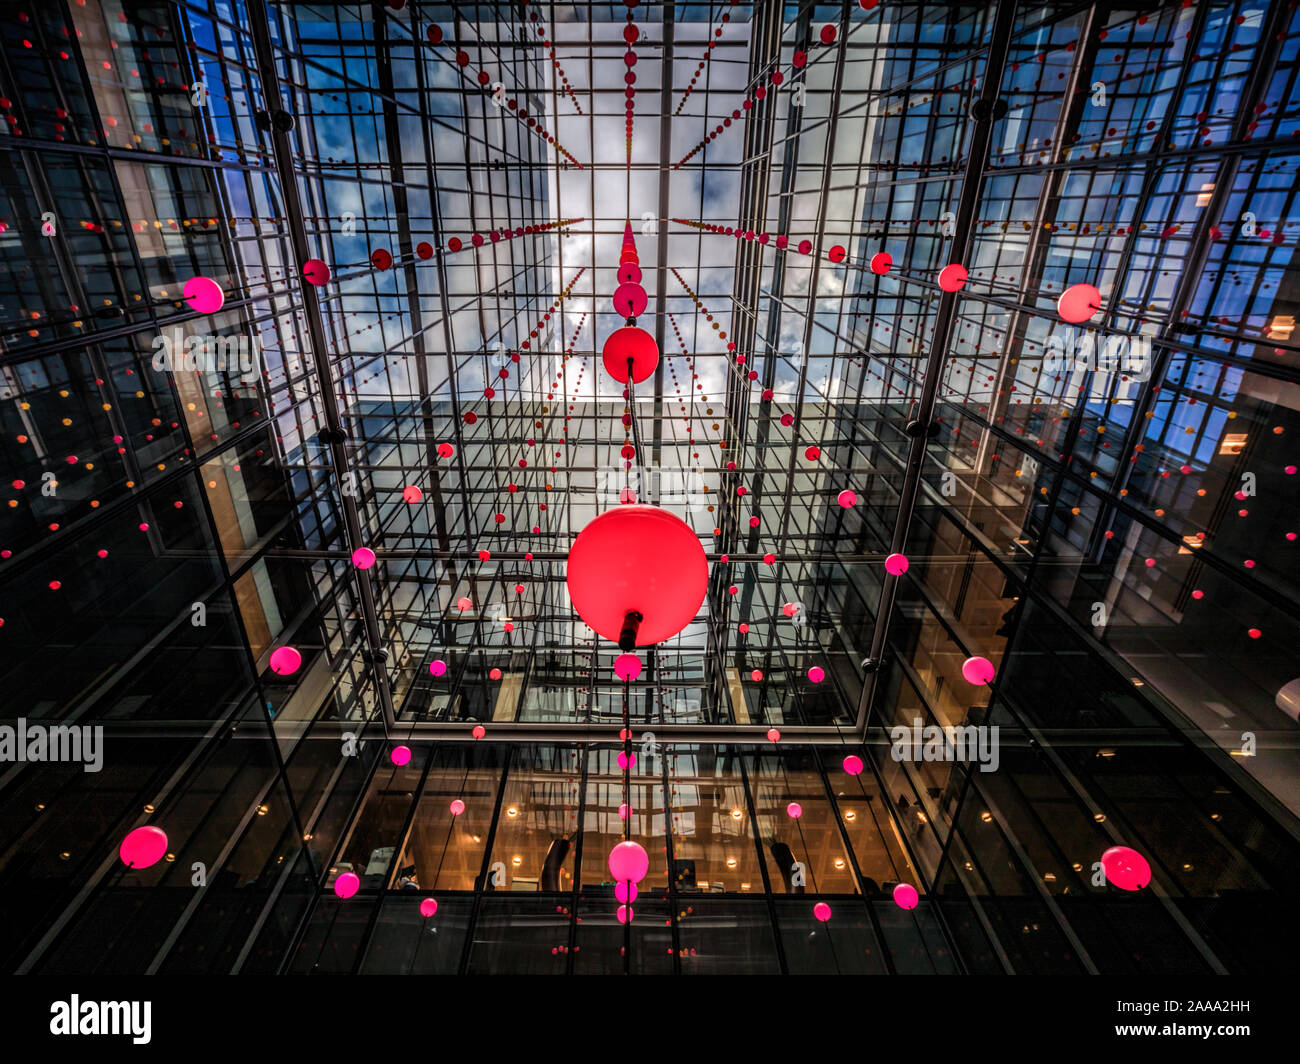 'Pixel Cloud' installation by Daniel Hirchmann. Luminescent spheres suspended in an atrium inside an office building, One Bishops Square, London. UK Stock Photo